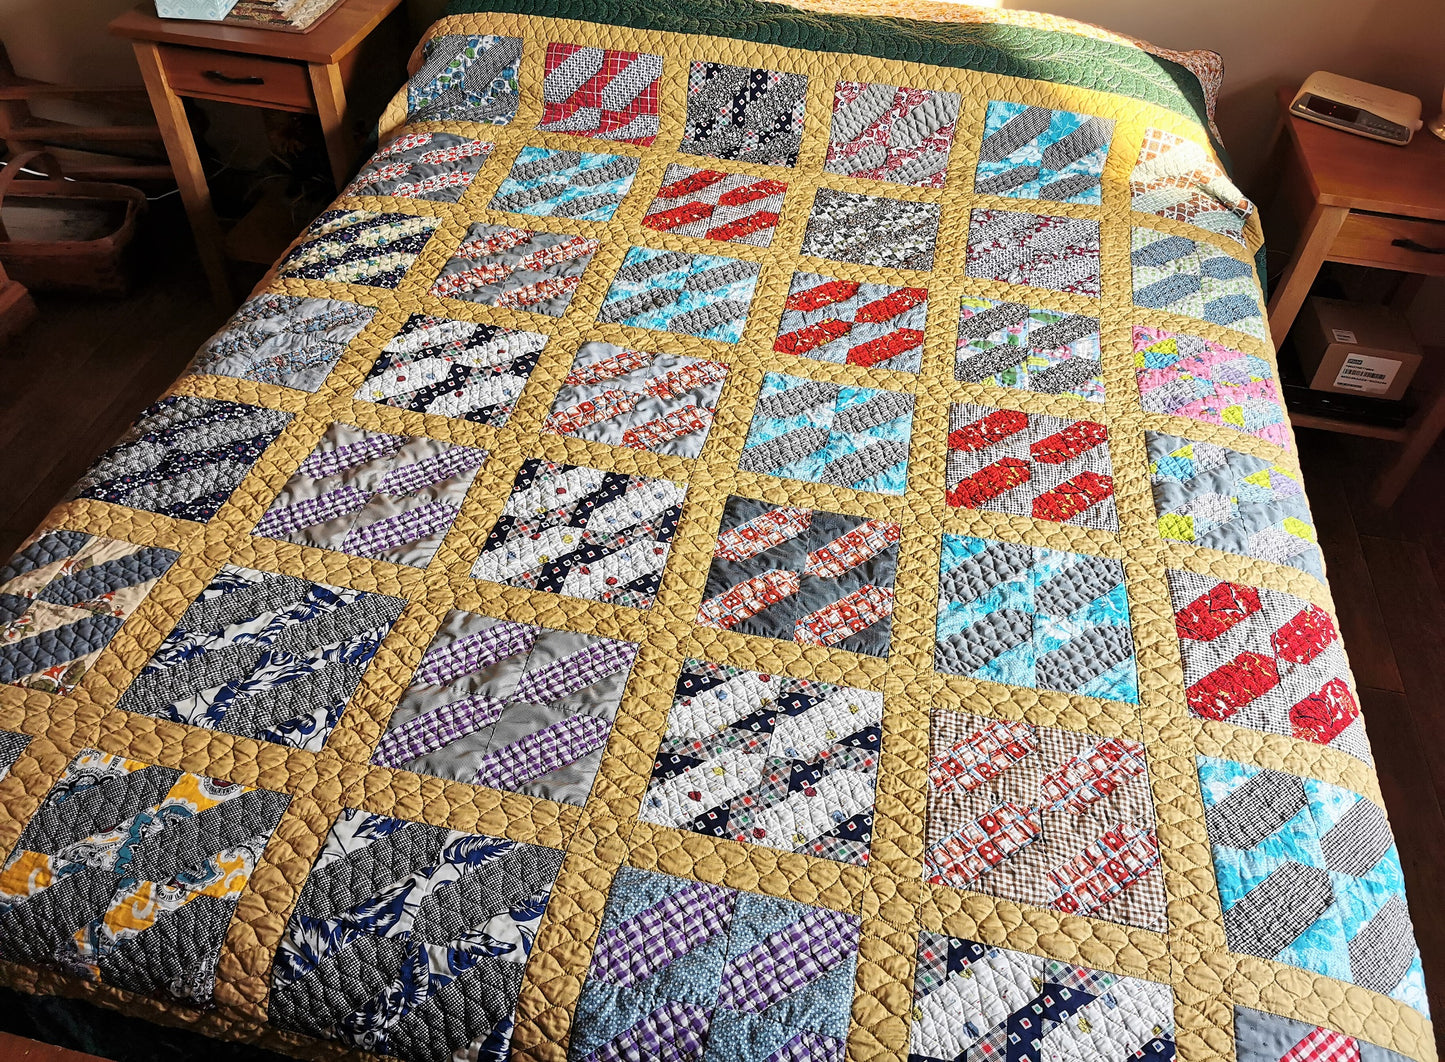 the vintage patchwork blocks in the mustard yellow grid is shown here. Each block within the grid has vintage fabrics and is made of basically two colors with the piecing done in such a way as to create the effect of four backslashes in each block. Colors include various shades of gray, red, lighter blue, navy, a touch of yellow & purple.  